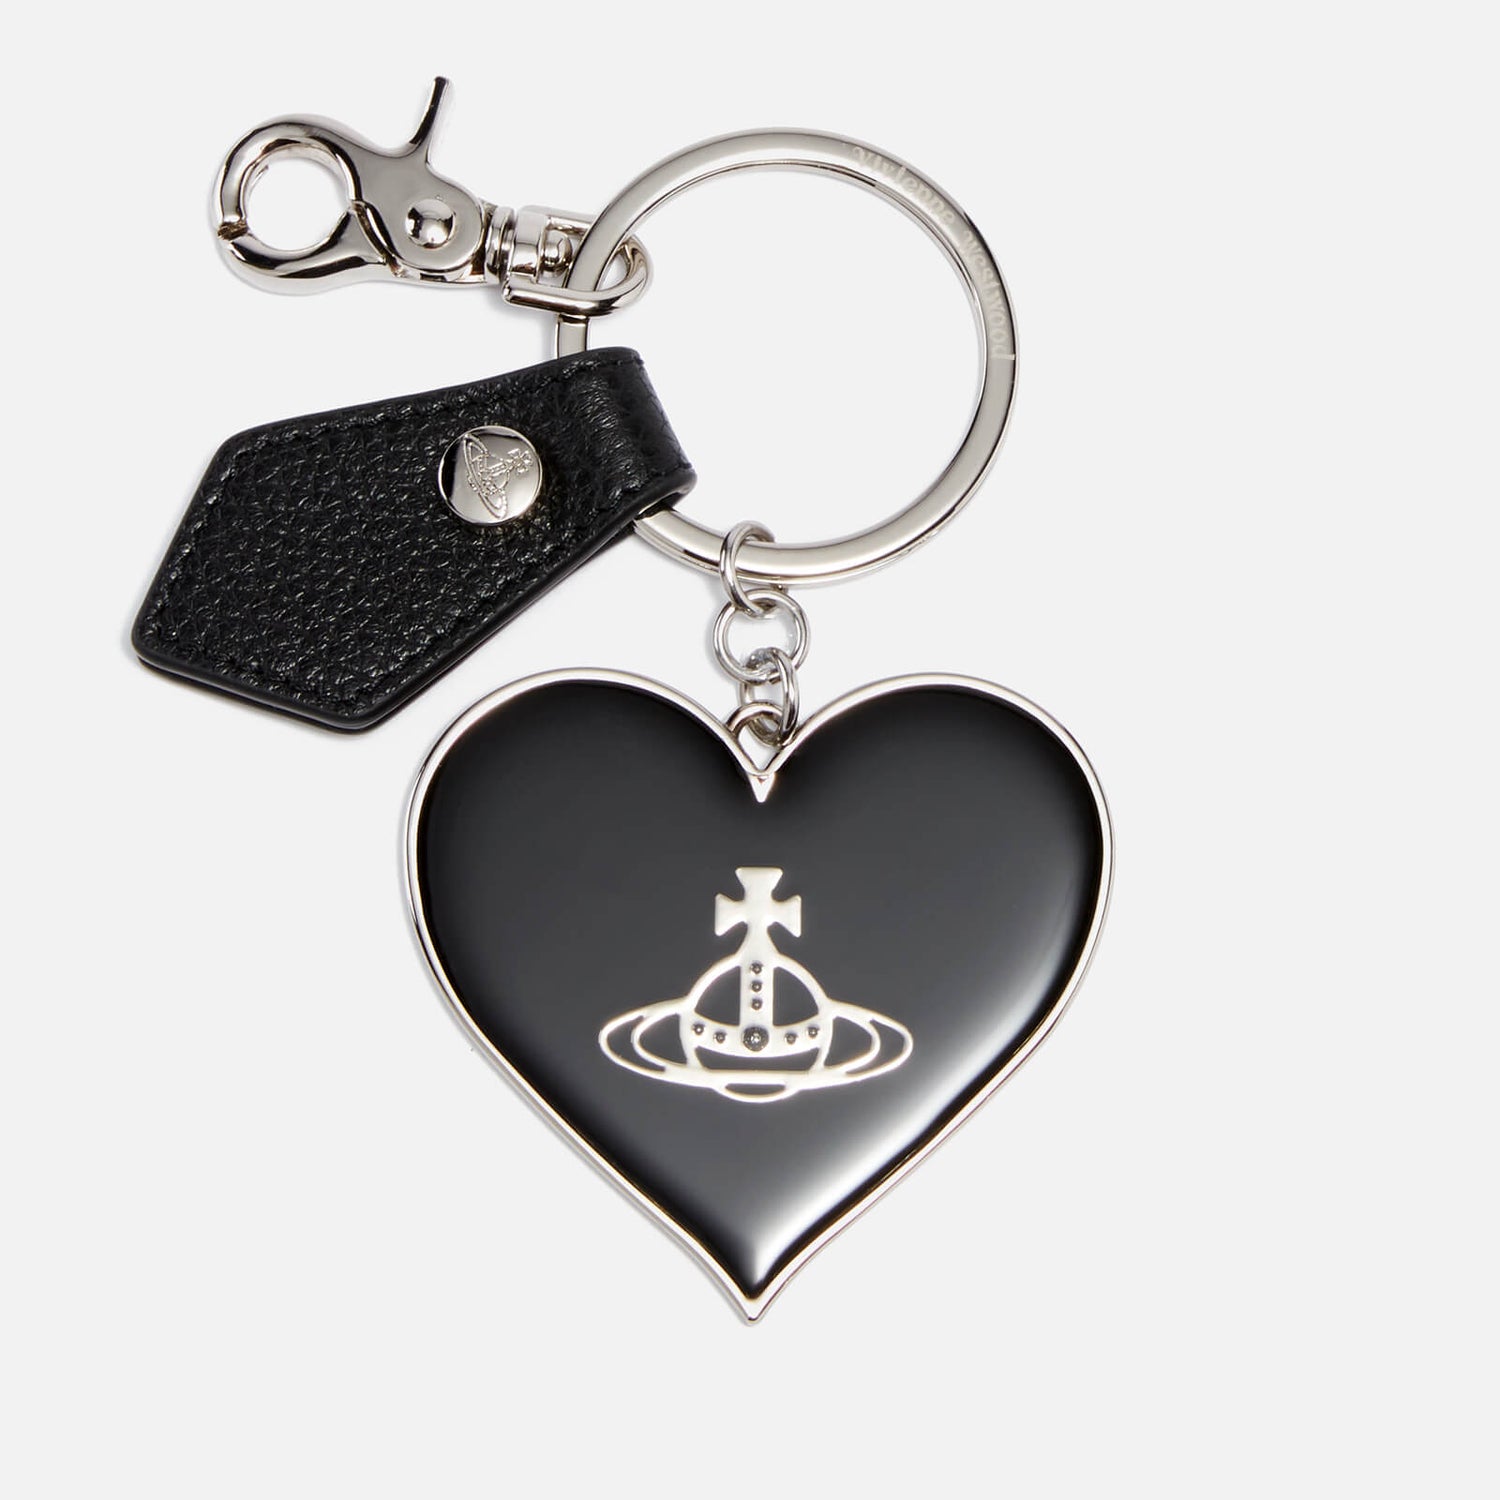 Vivienne Westwood Orb Leather and Silver-Tone Key Ring